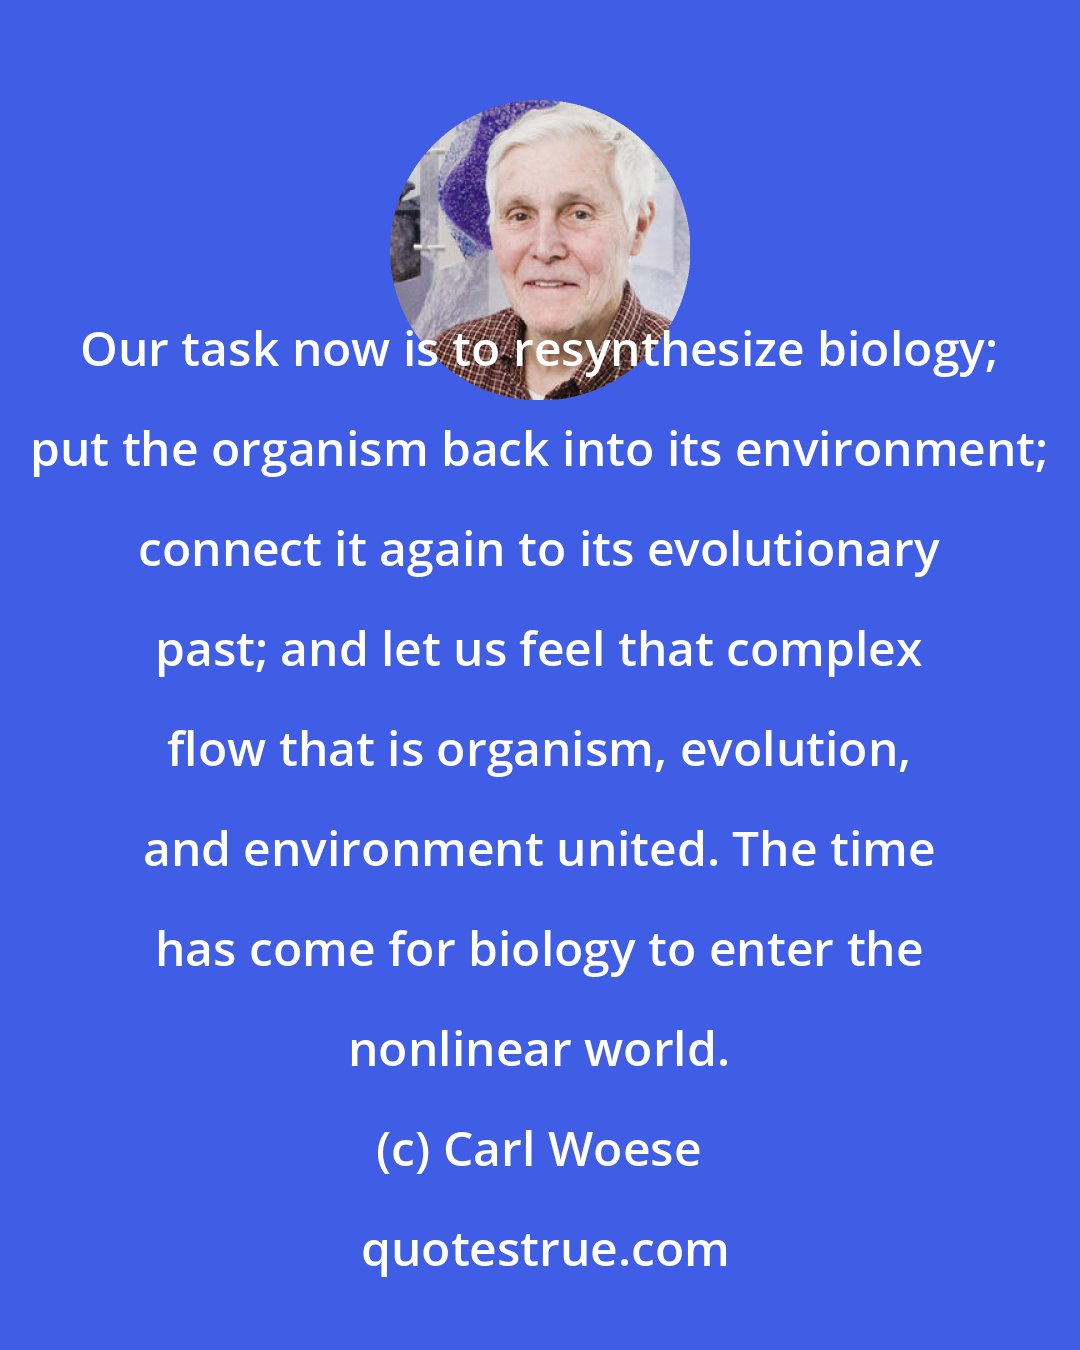 Carl Woese: Our task now is to resynthesize biology; put the organism back into its environment; connect it again to its evolutionary past; and let us feel that complex flow that is organism, evolution, and environment united. The time has come for biology to enter the nonlinear world.